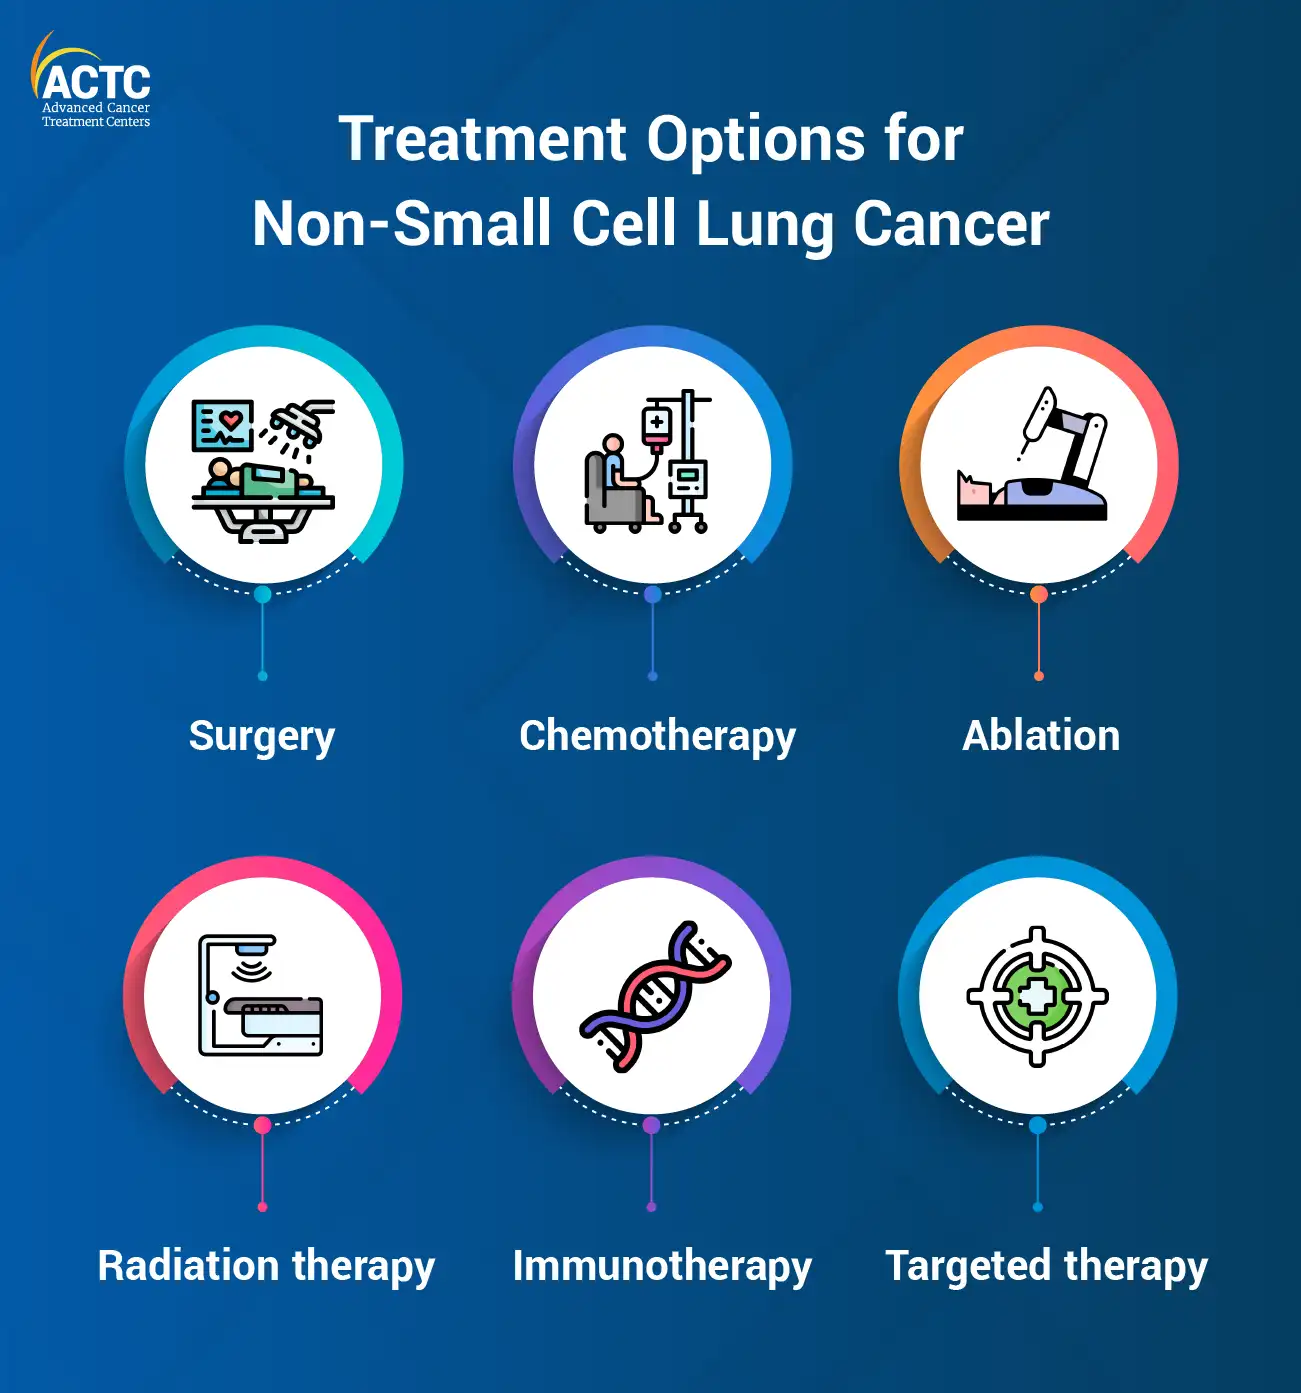 Non-Small Cell Lung Cancer Treatment Options